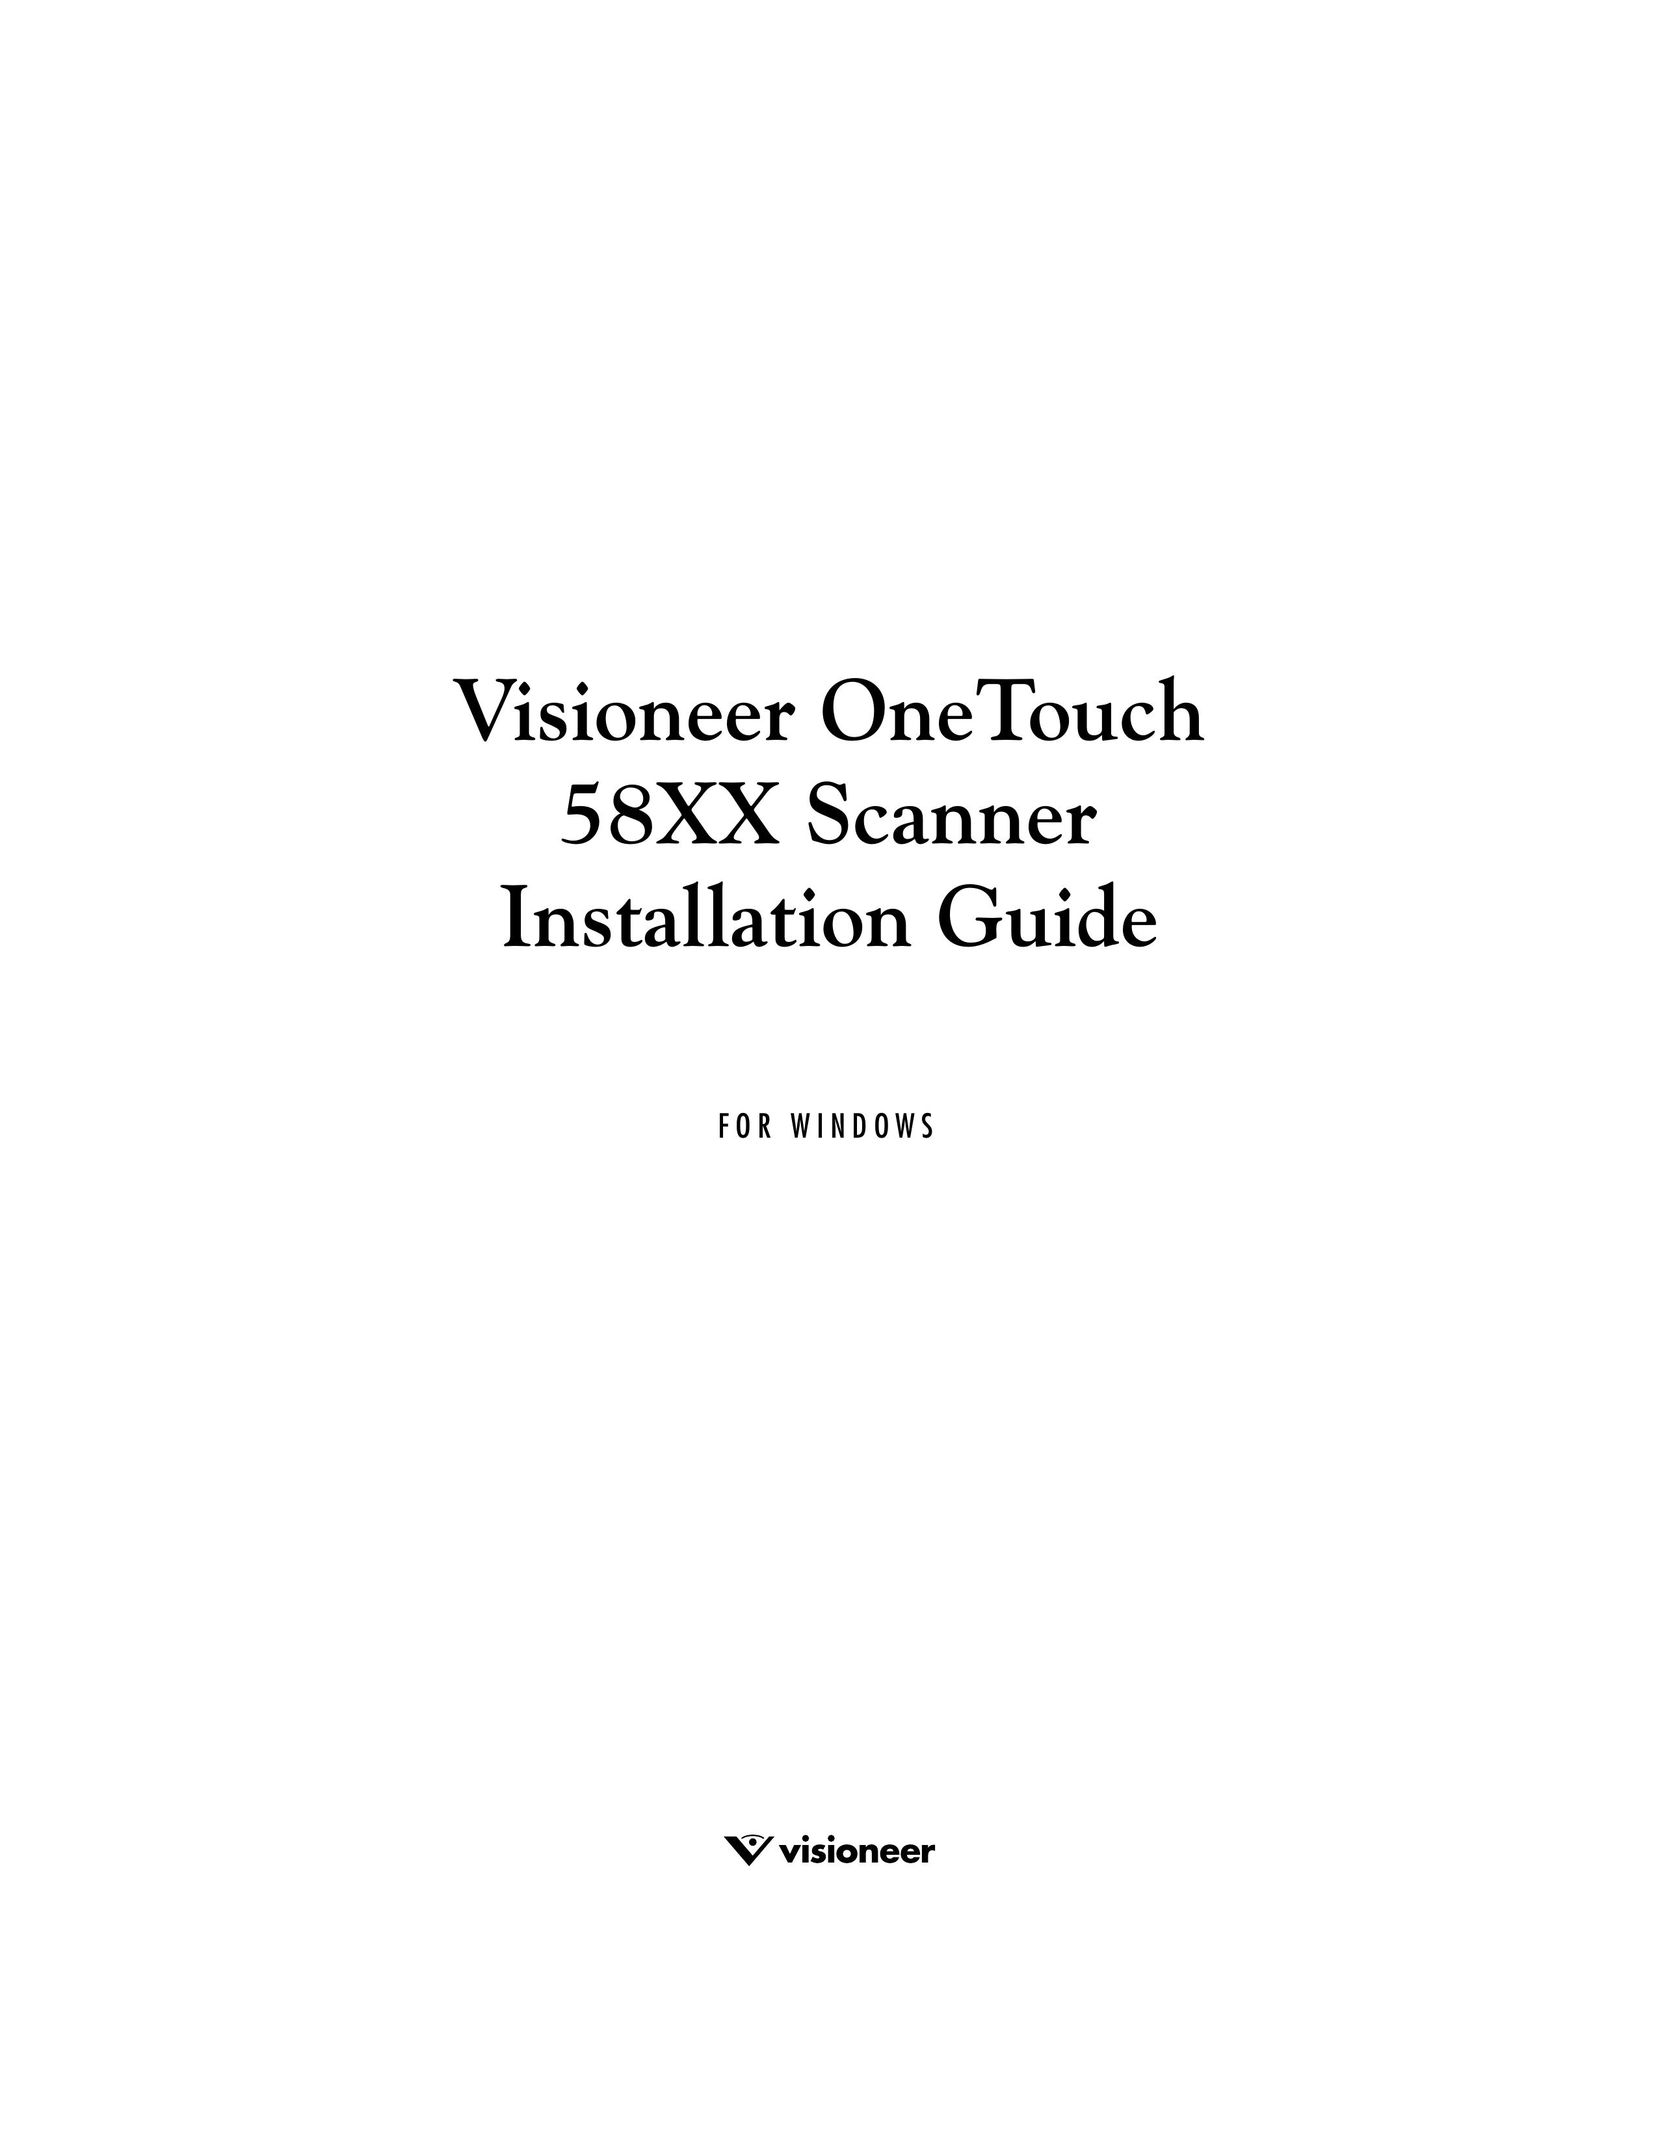 Visioneer OneTouch 58XX Scanner User Manual